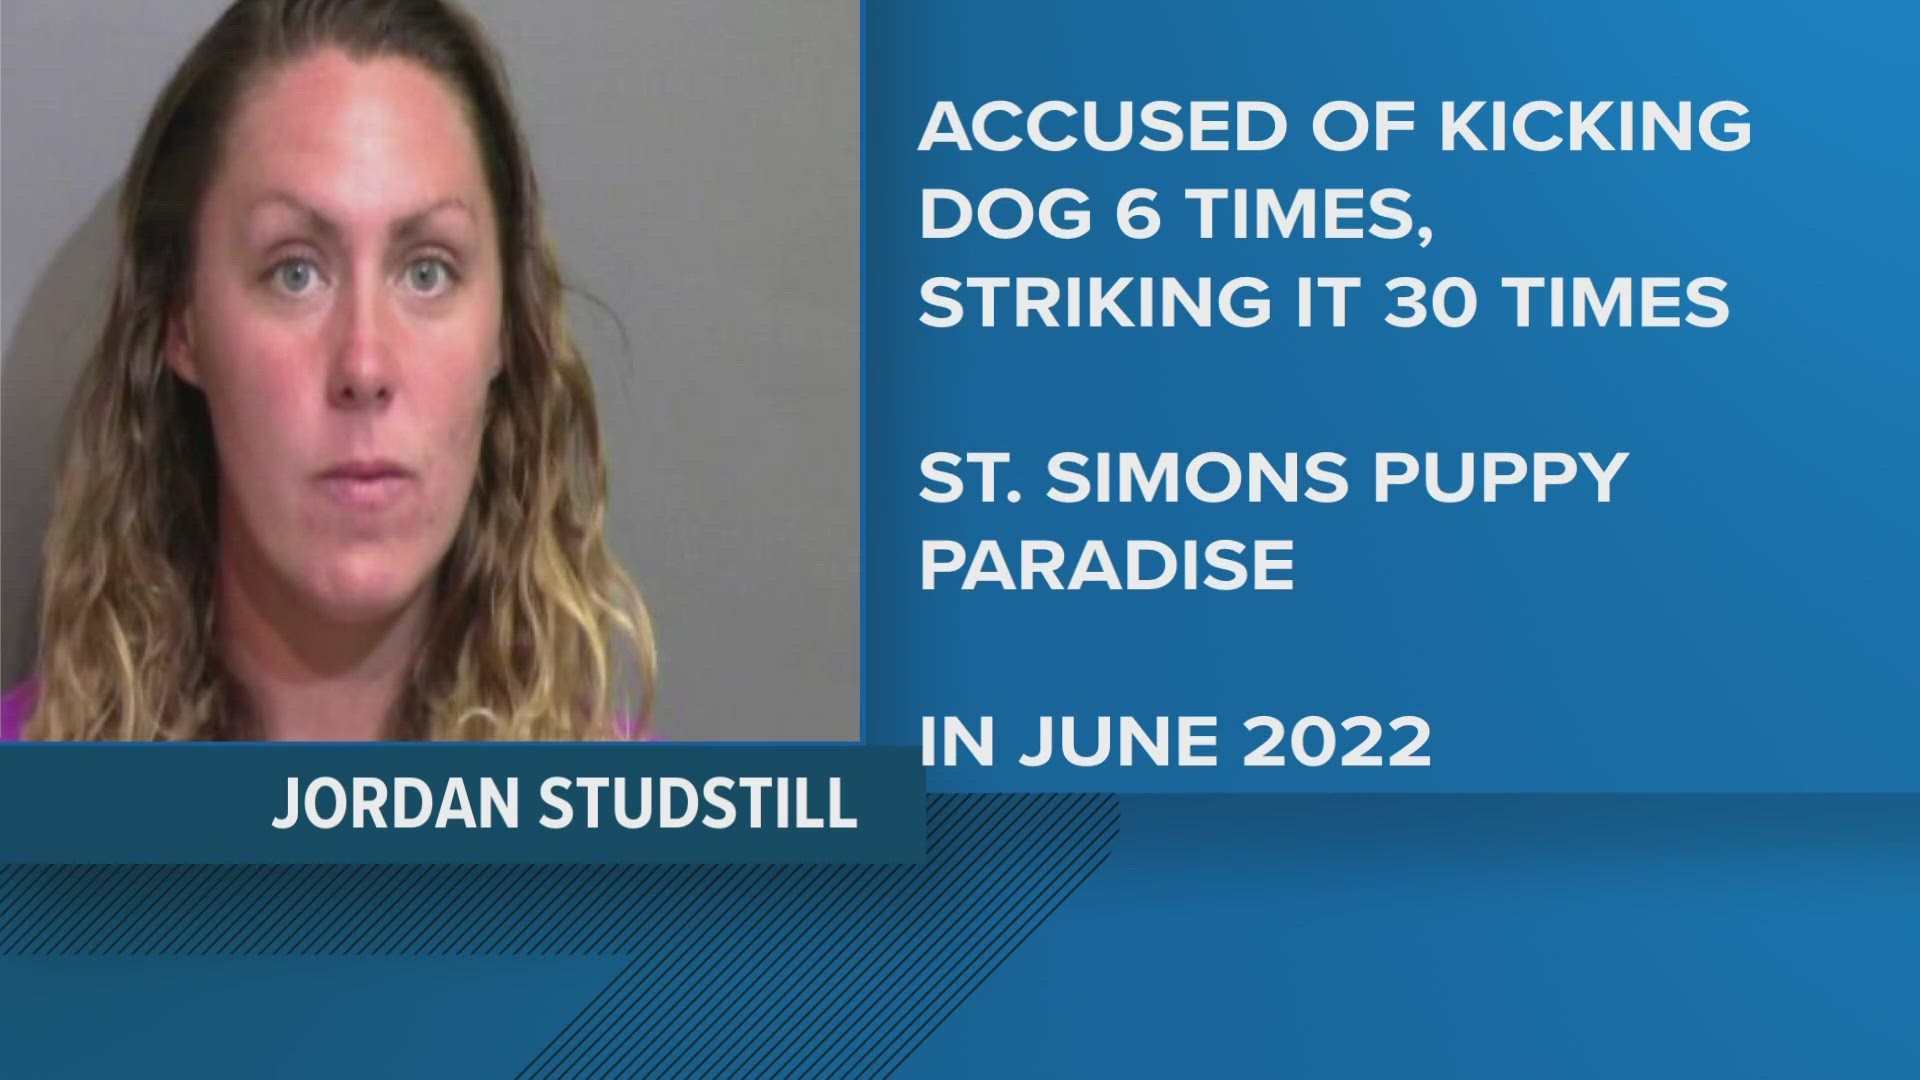 Jordan Studstill is charged with animal cruelty and is accused of kicking a dog 6 times & striking it 30 times in the head in June 2022 at St. Simons Puppy Paradise.